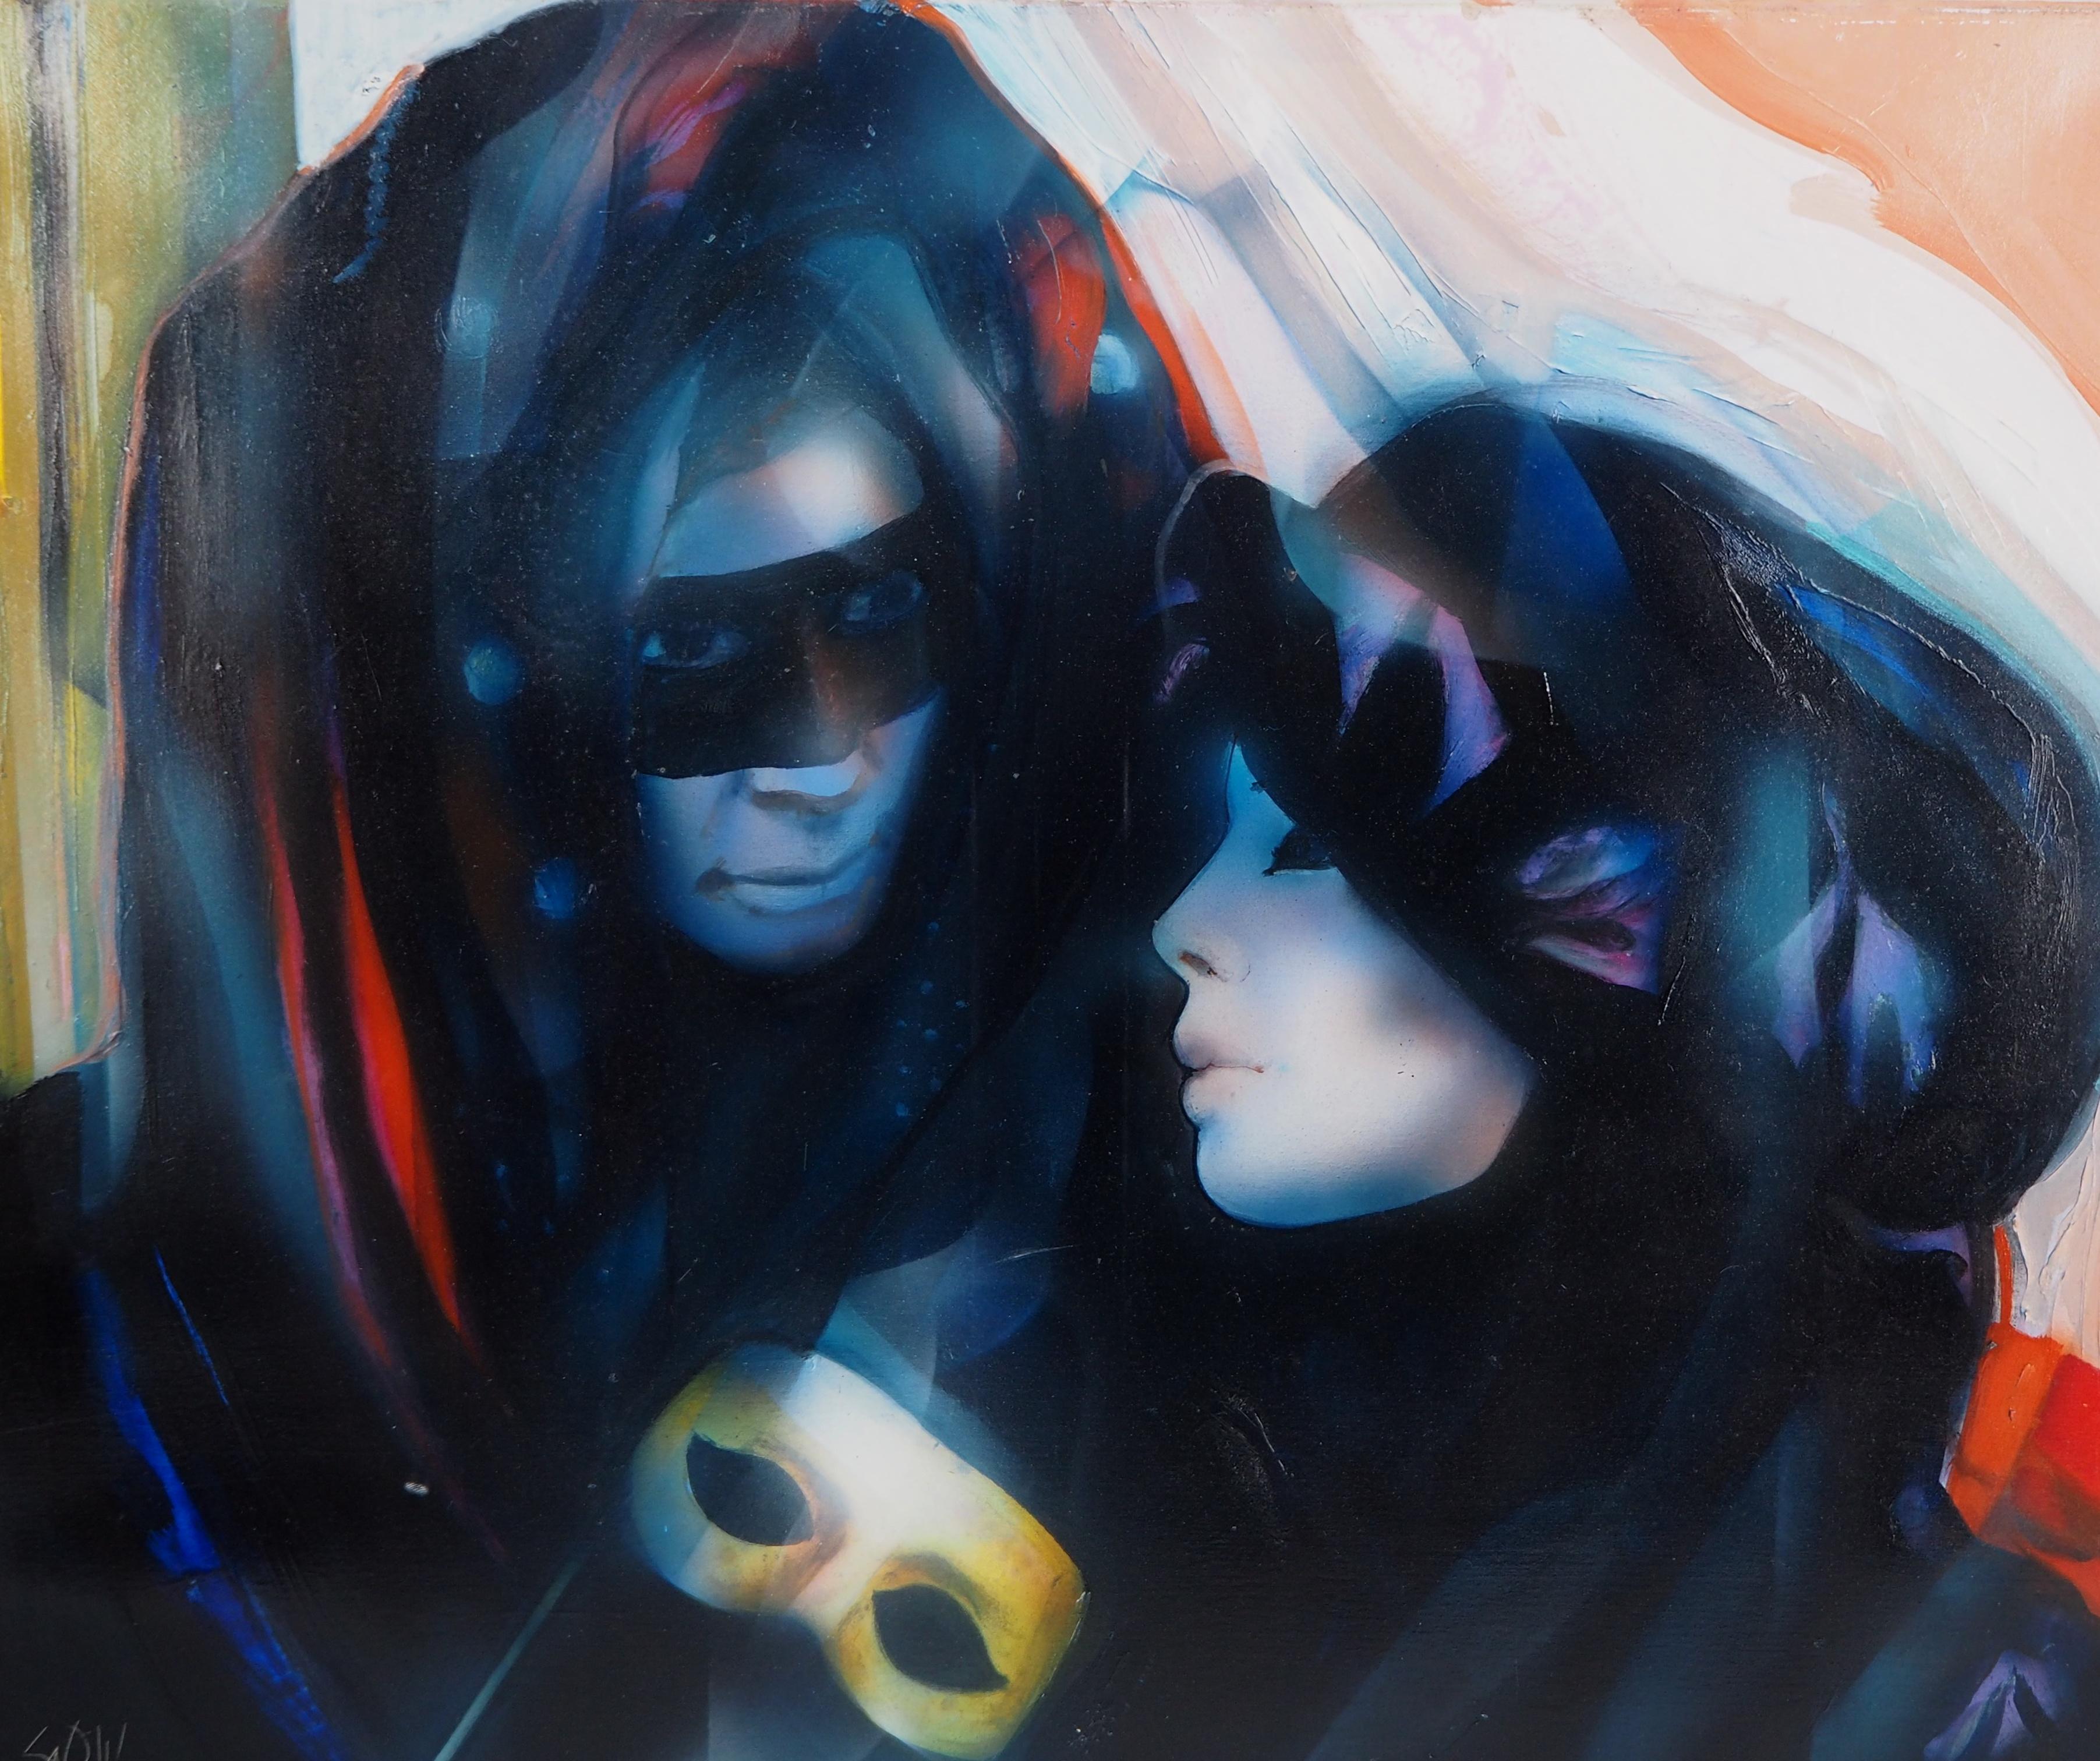 Venice carnival : The Lovers - Handsigned oil on canvas - Painting by Jean-Baptiste Valadie